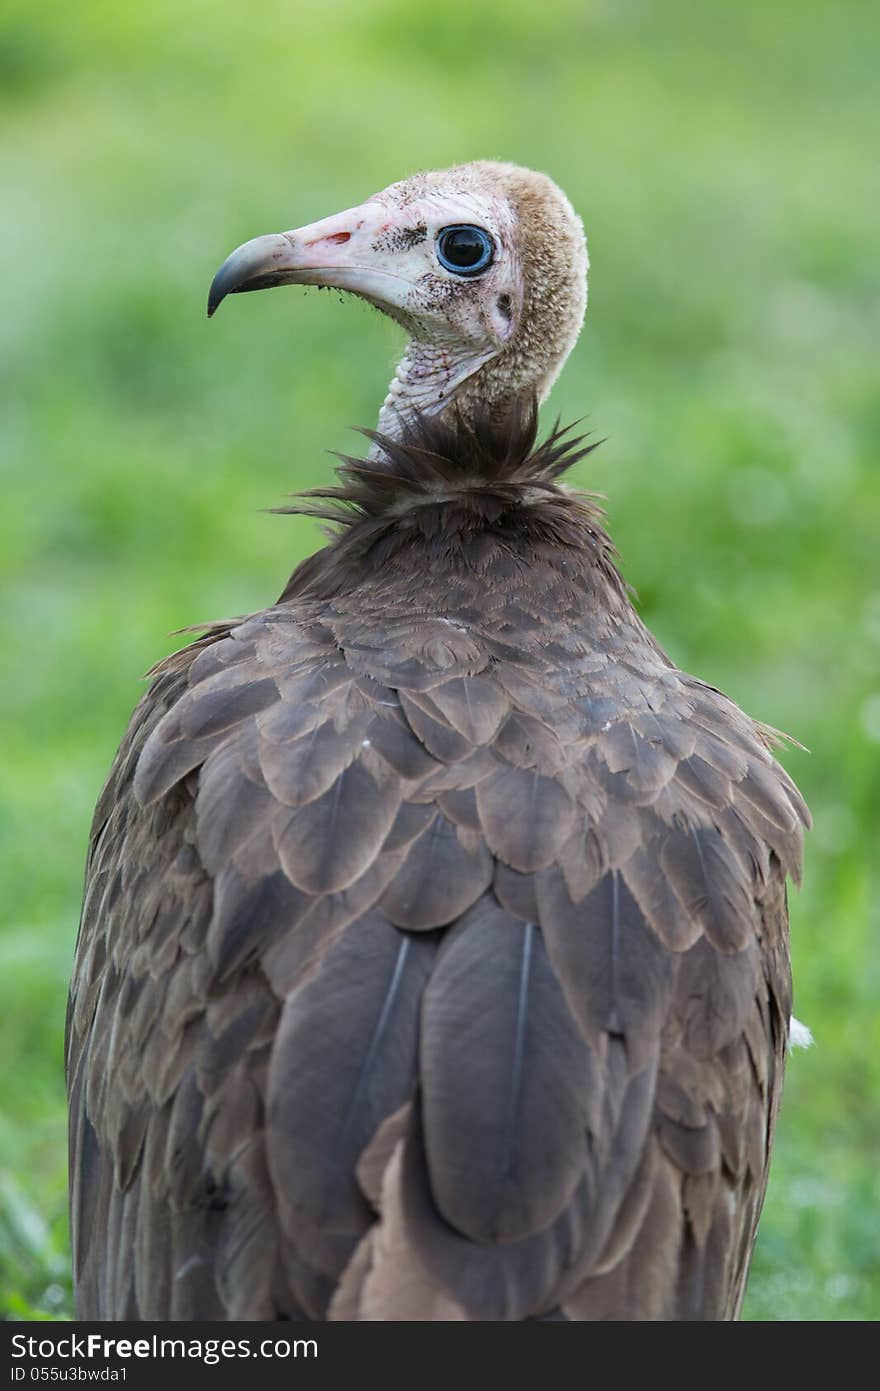 A high resolution image of vultures